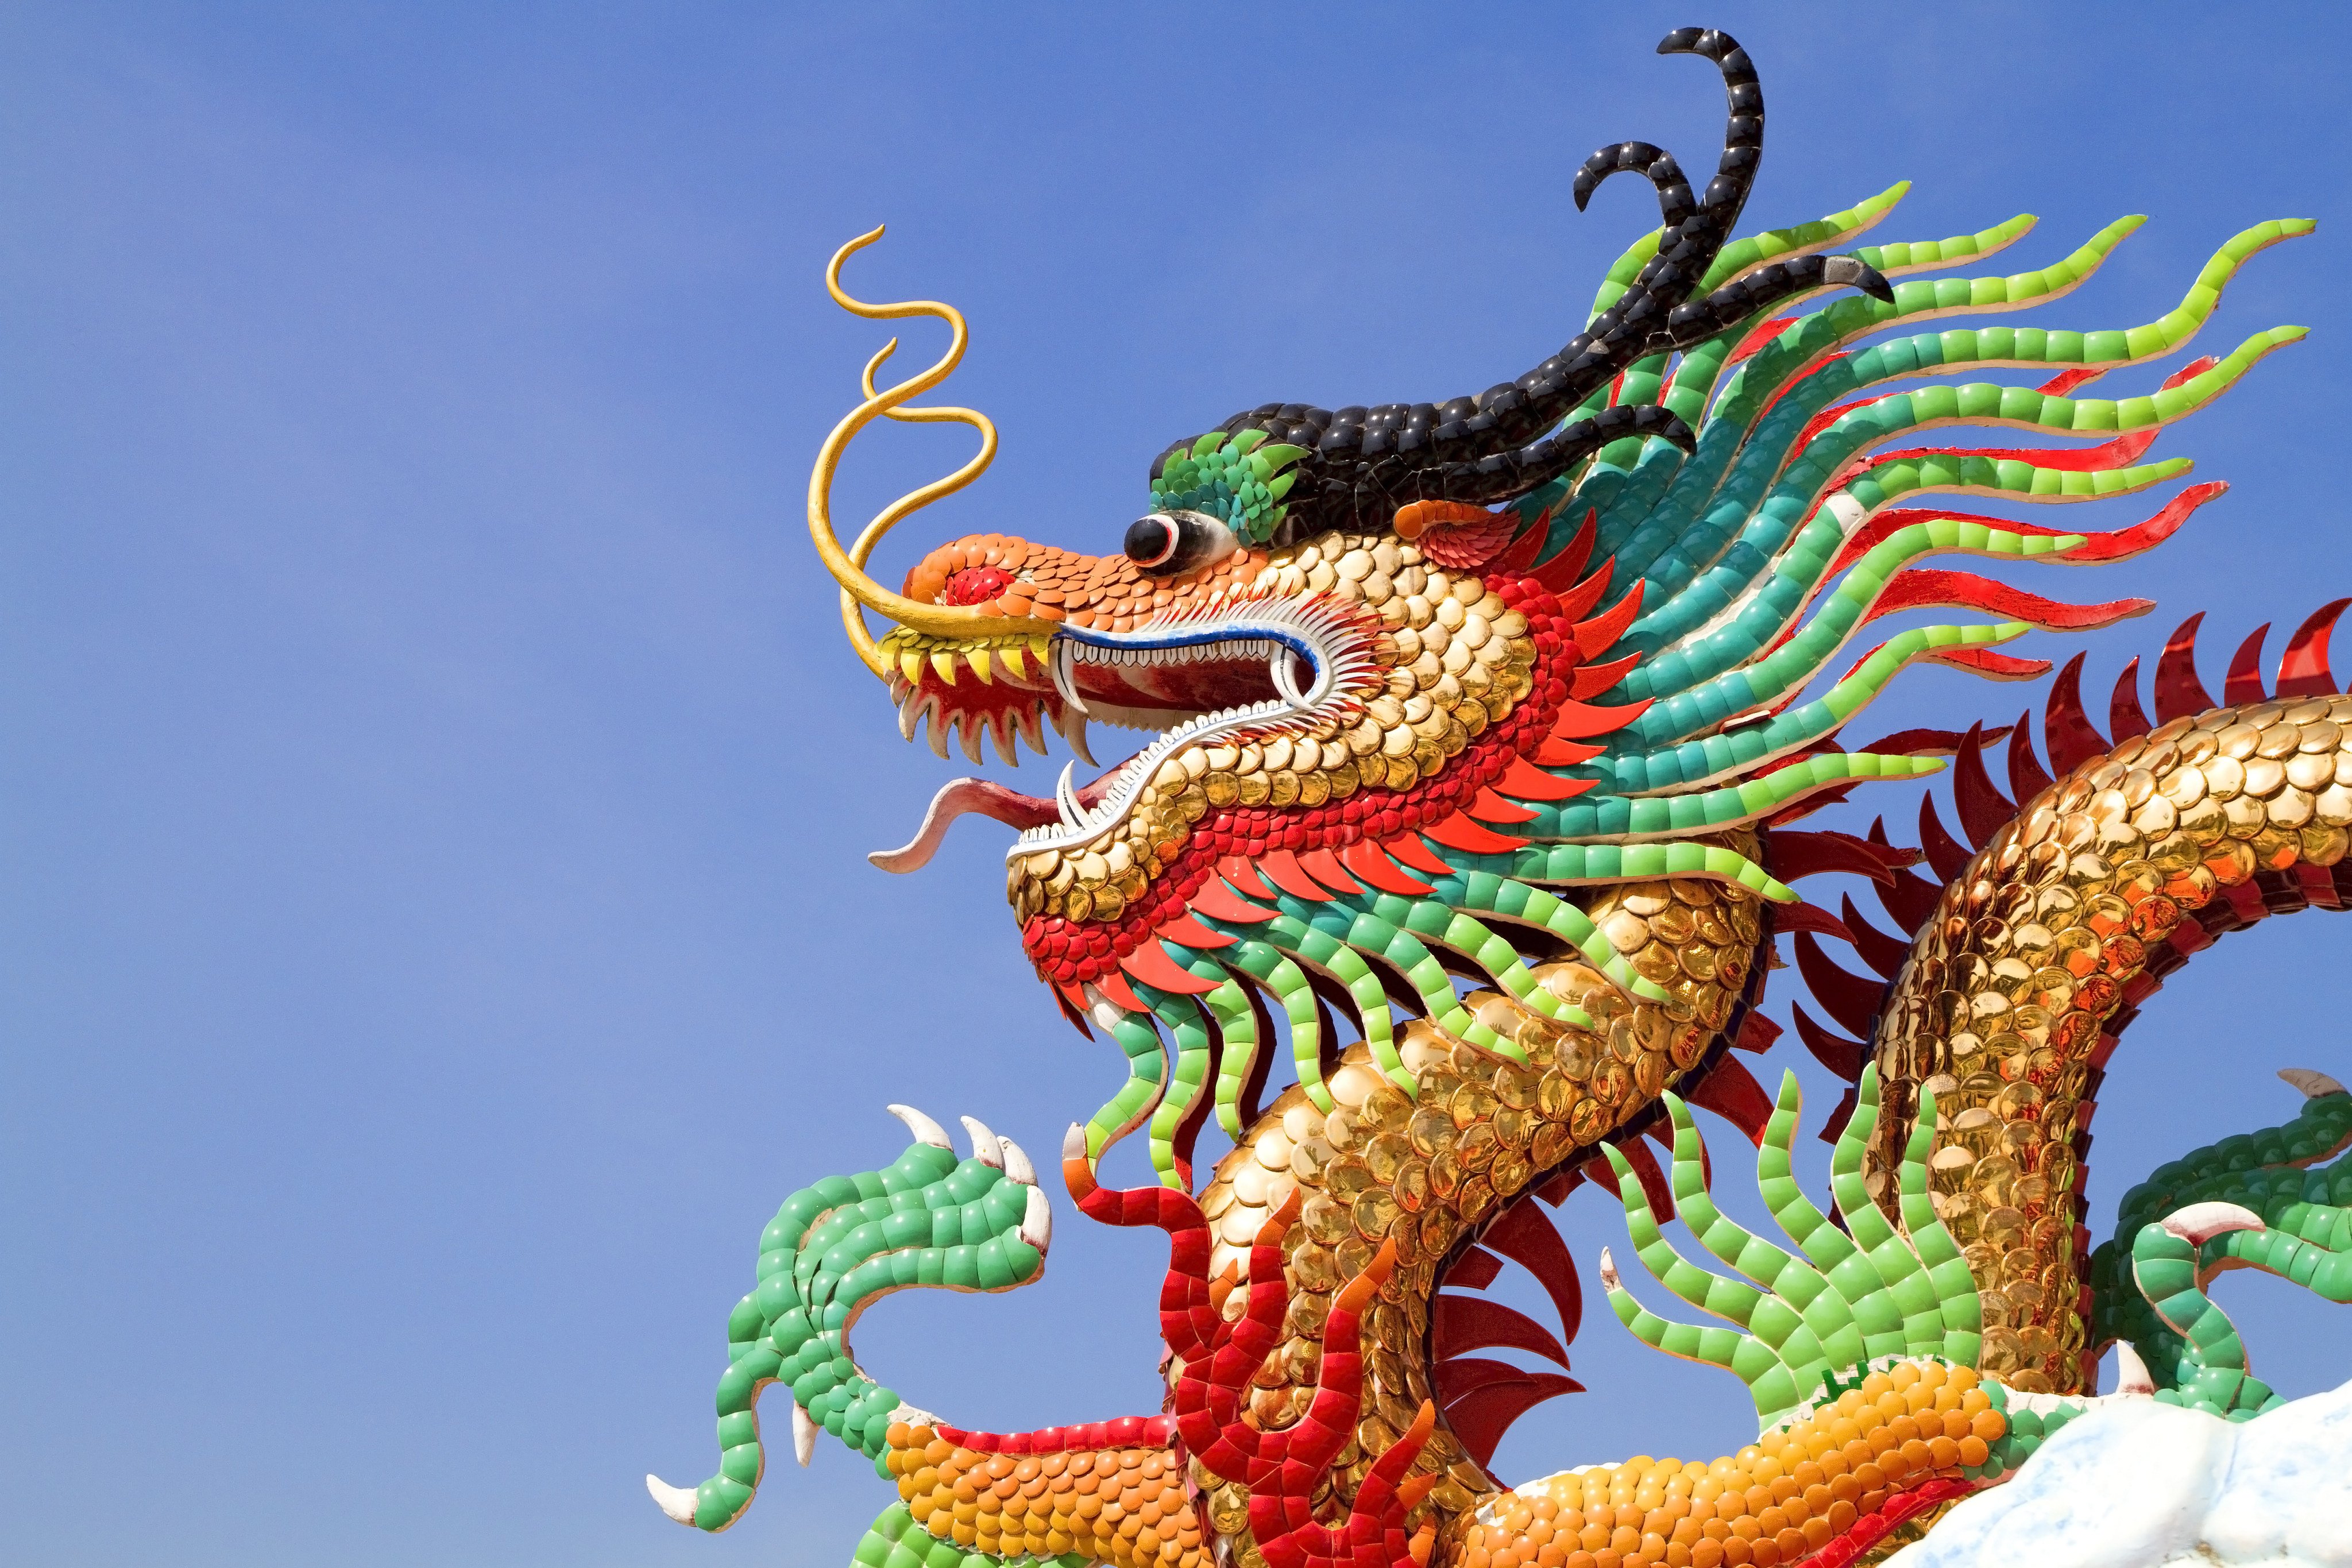 Chinese horoscopes for the Year of the Wood Dragon 2024: zodiac